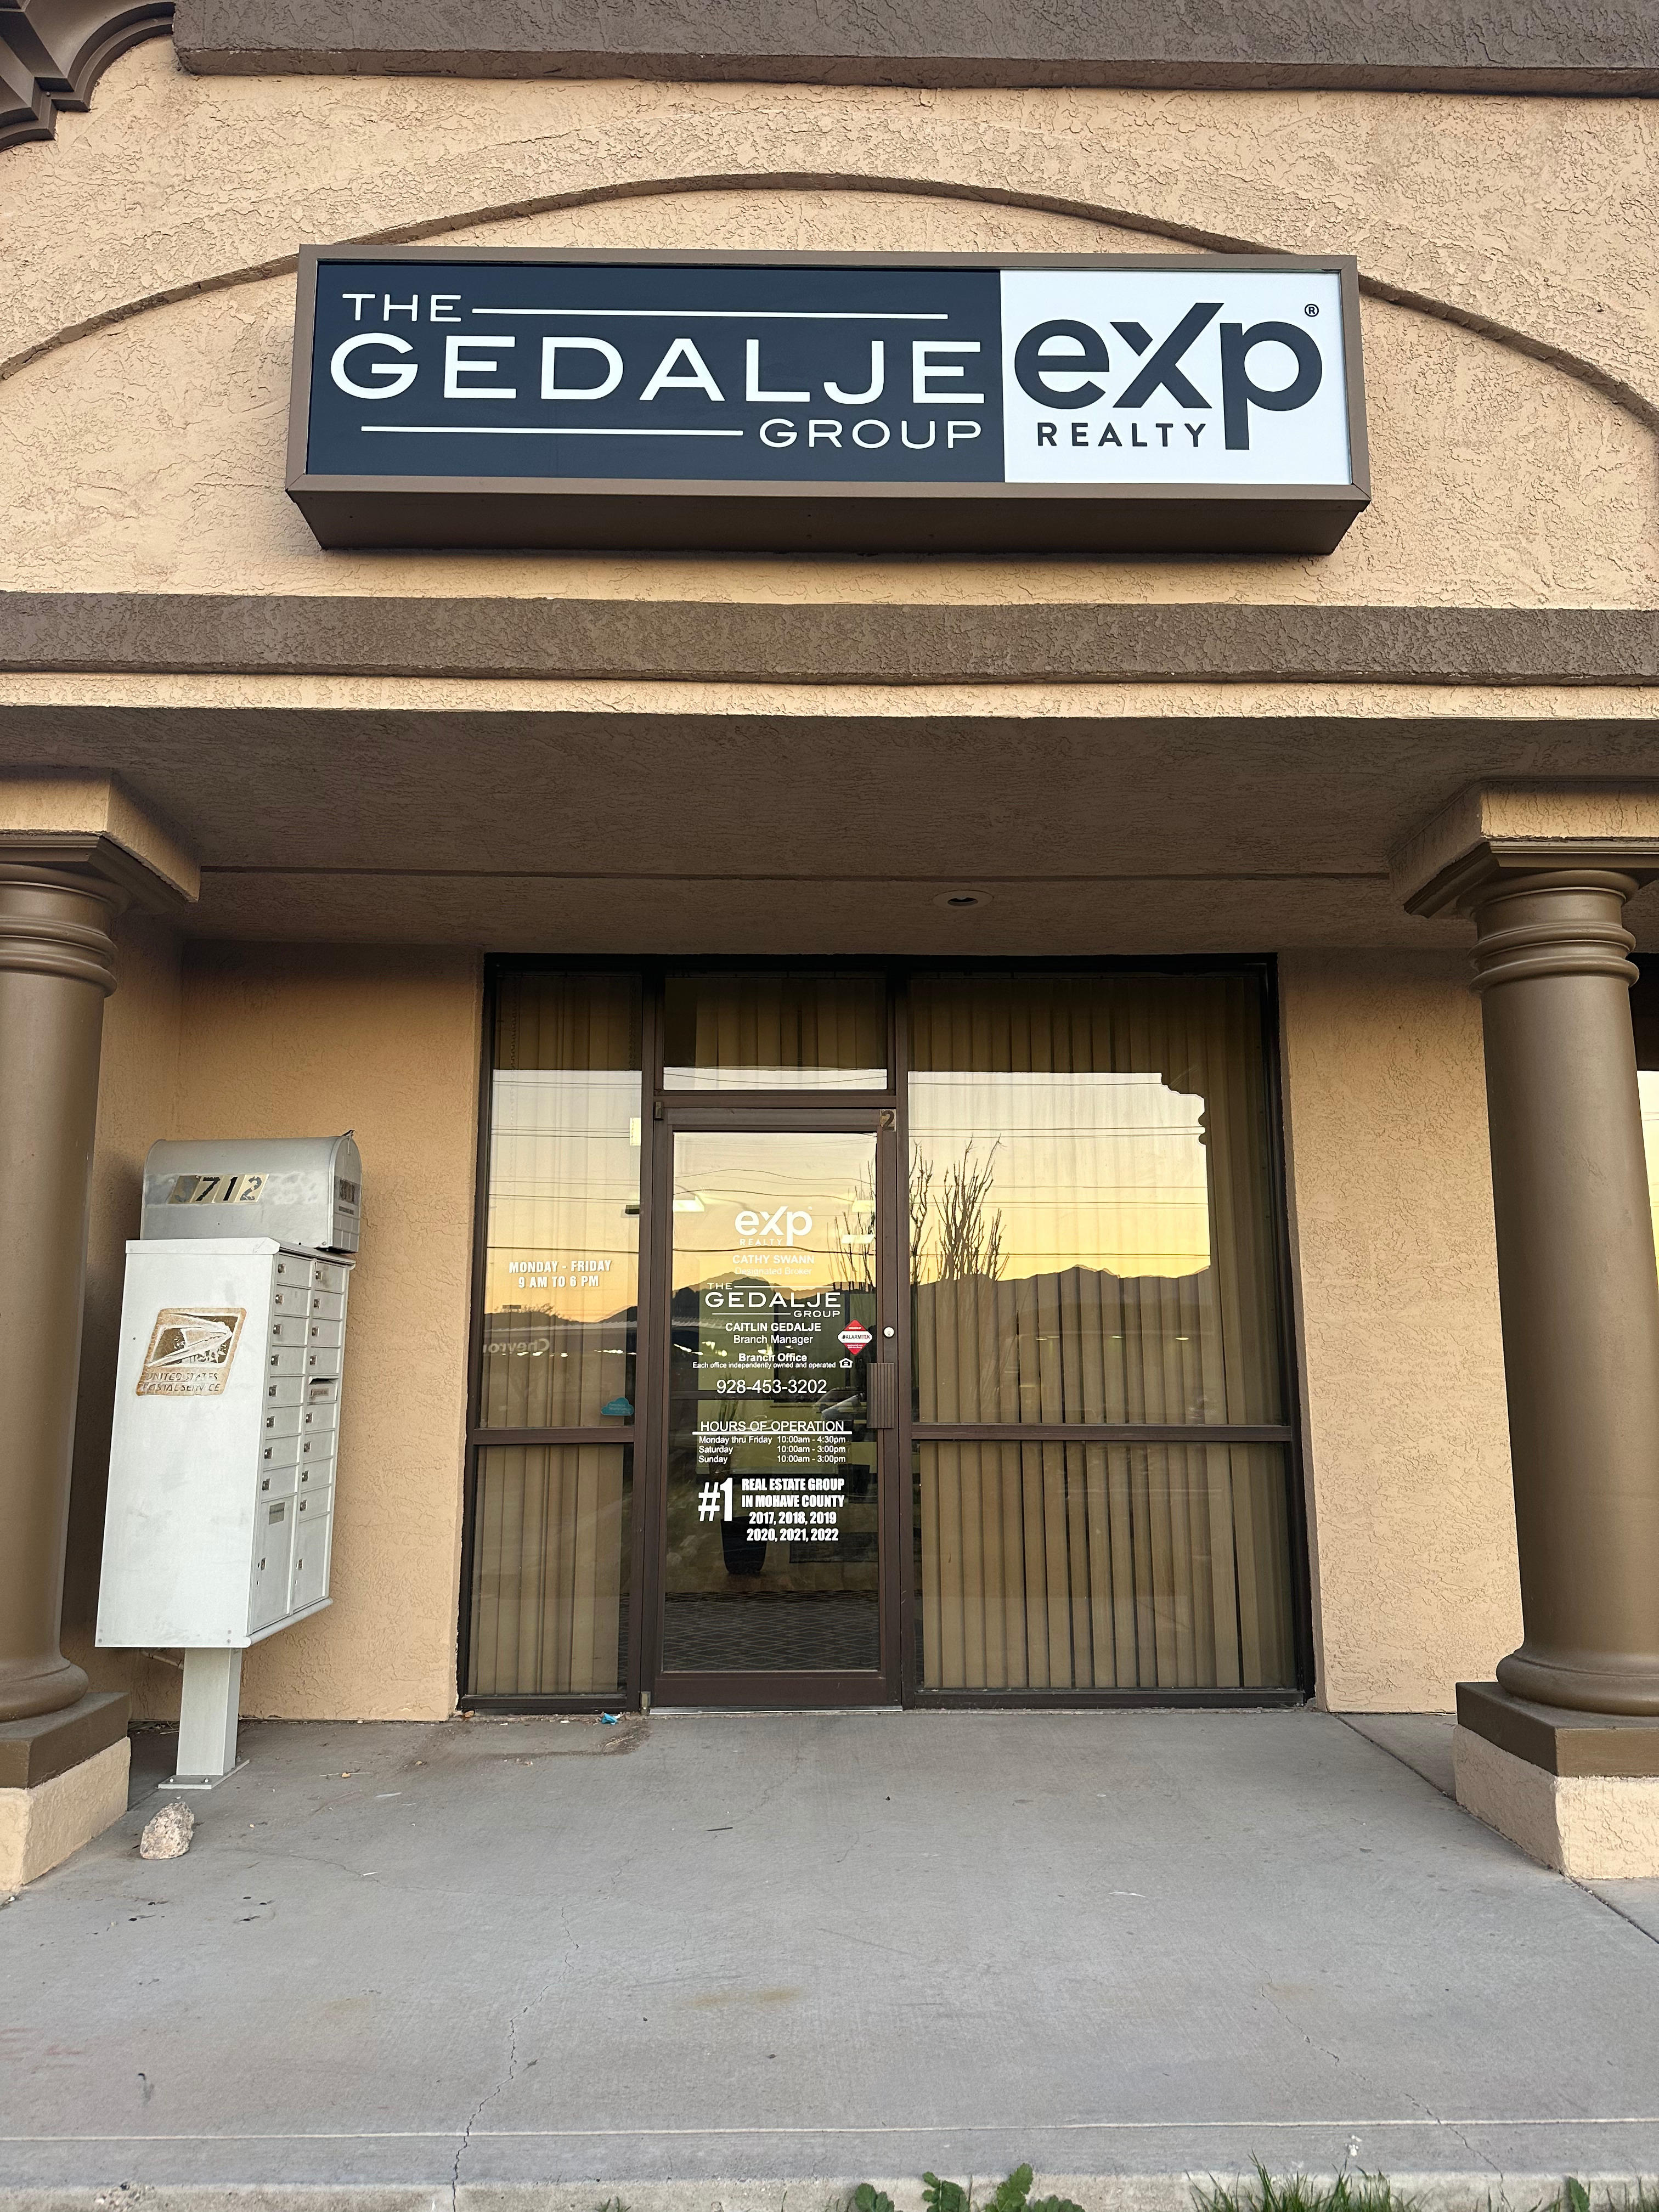 At The Gedalje Group, we understand that finding the best home builder for your new construction project is a make-or-break decision. As the leading real estate developer in Bullhead City, we have the resources, experience, and expertise to help you find the right home builder for your needs.